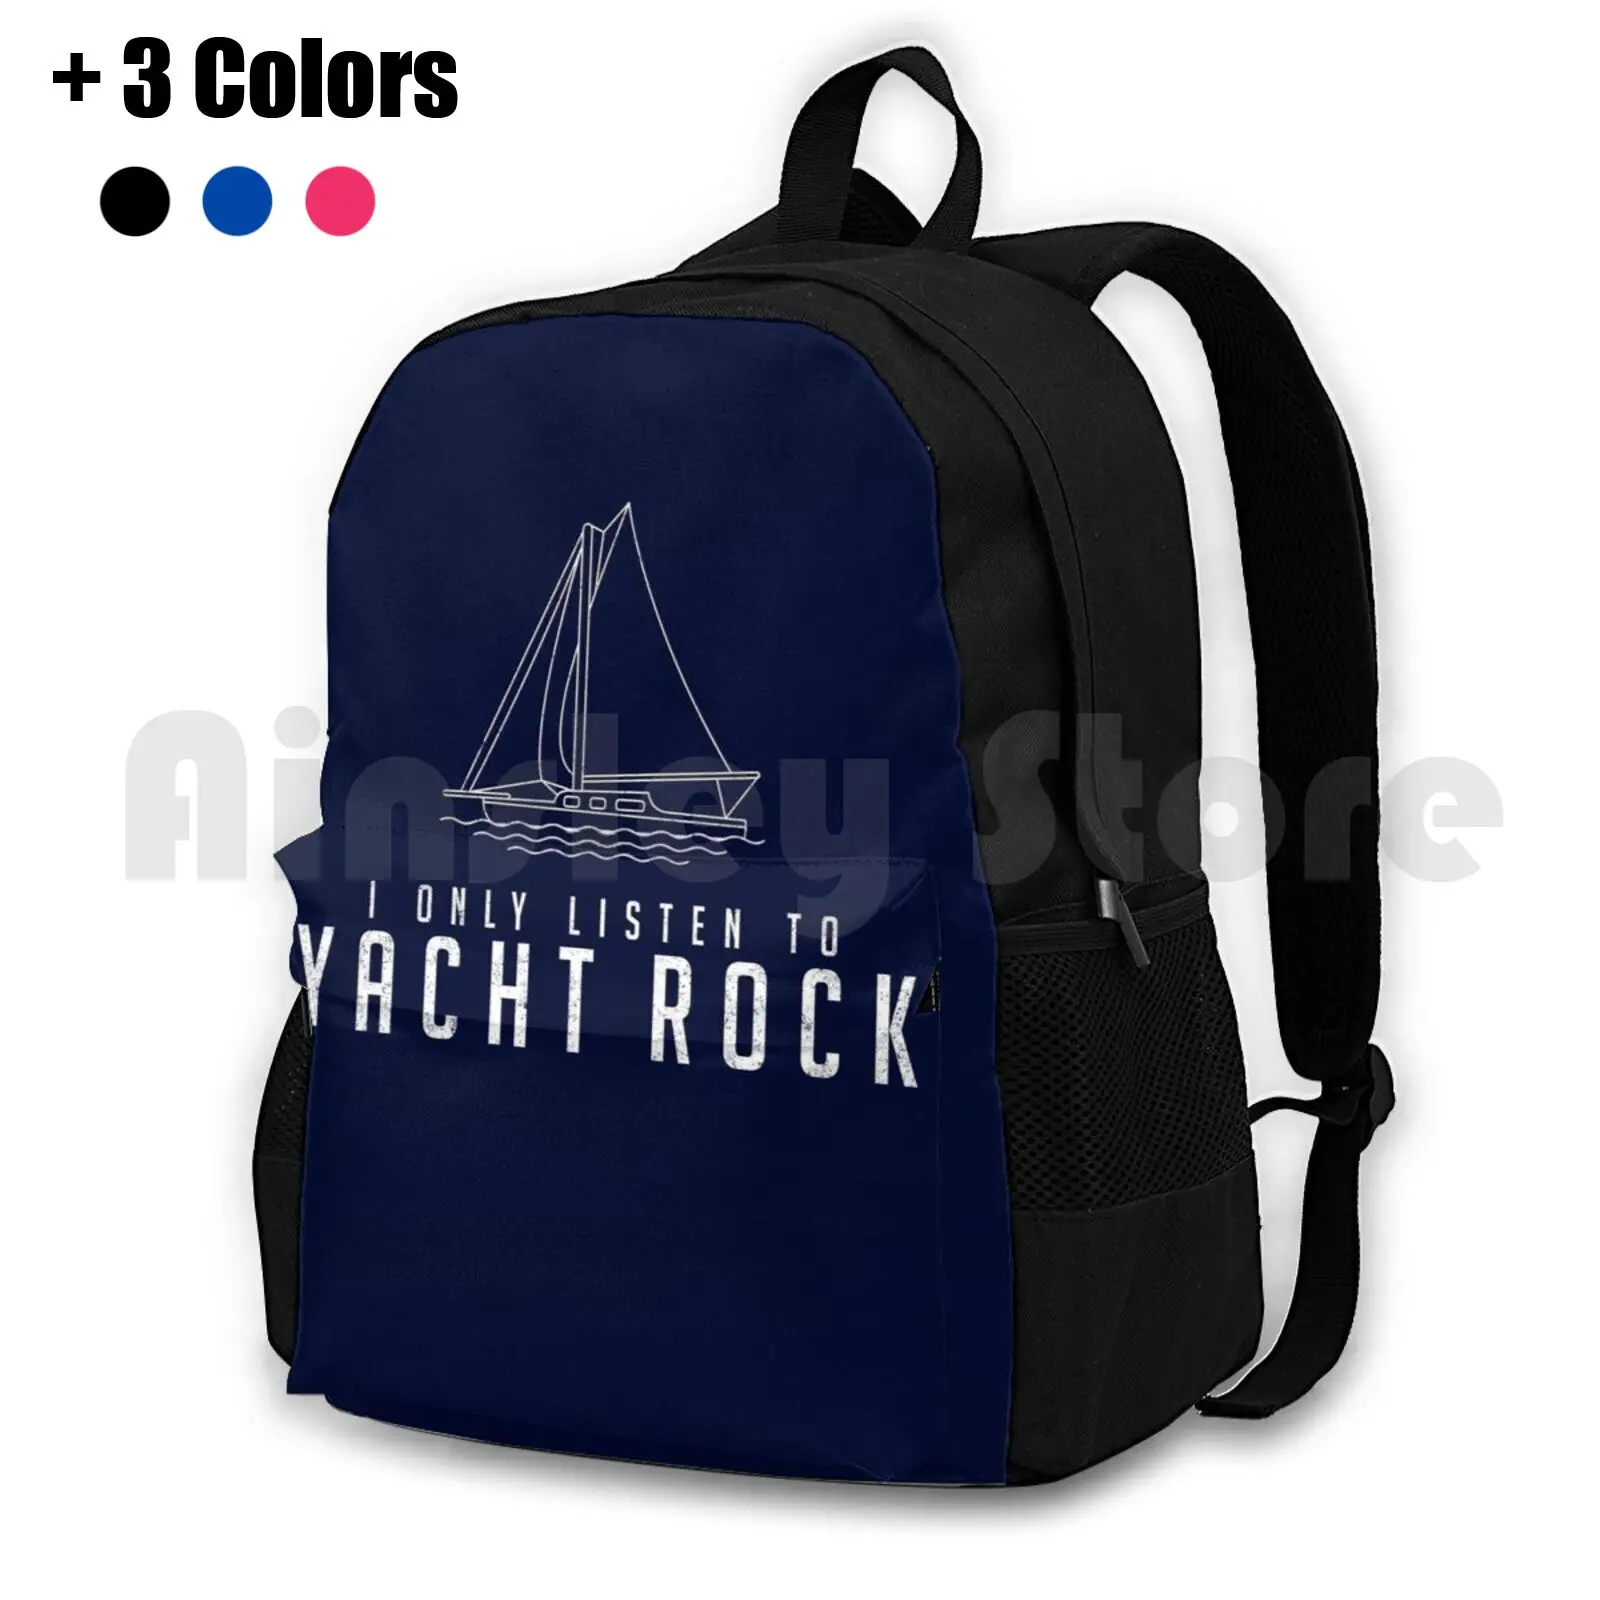 

I Only Listen To Yacht Rock Outdoor Hiking Backpack Riding Climbing Sports Bag Yacht Boating Sailing Sail Primotees Best